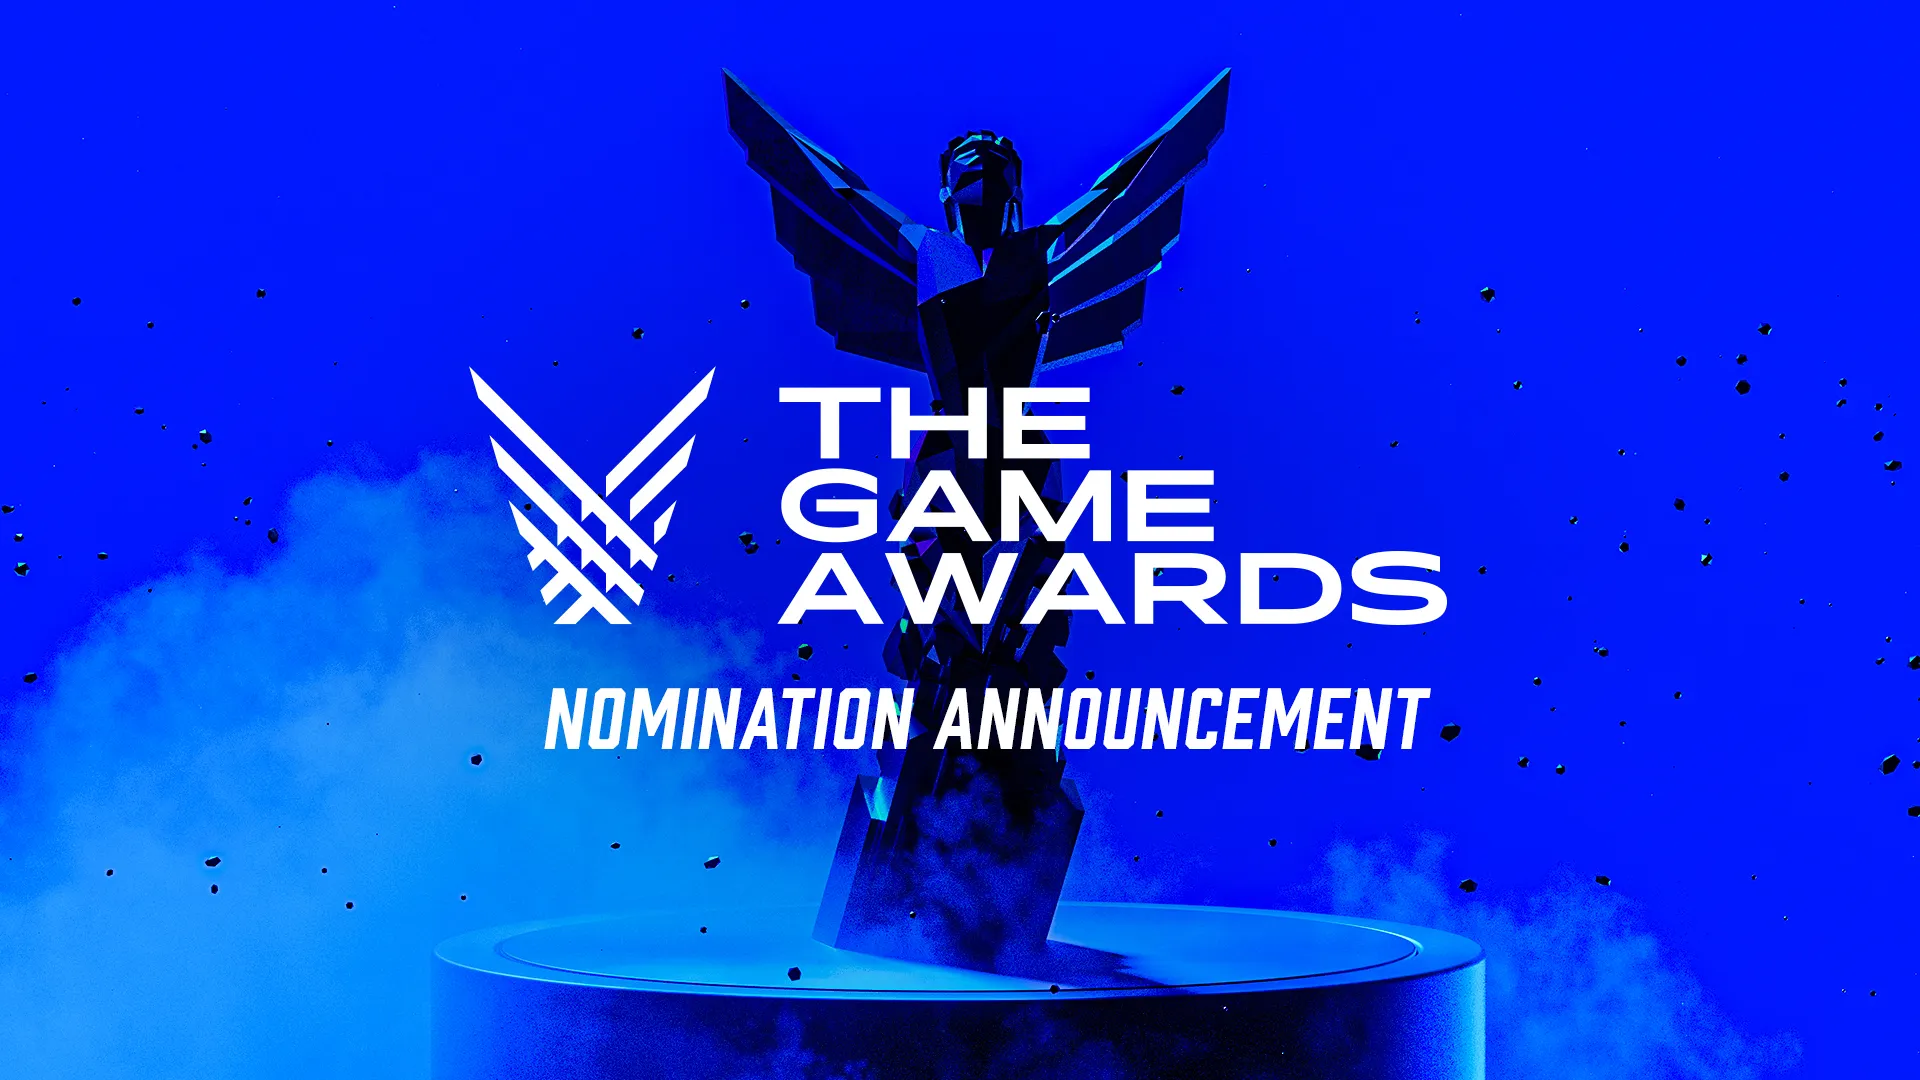 All winners and nominees from the Game Awards 2021 - GINX TV